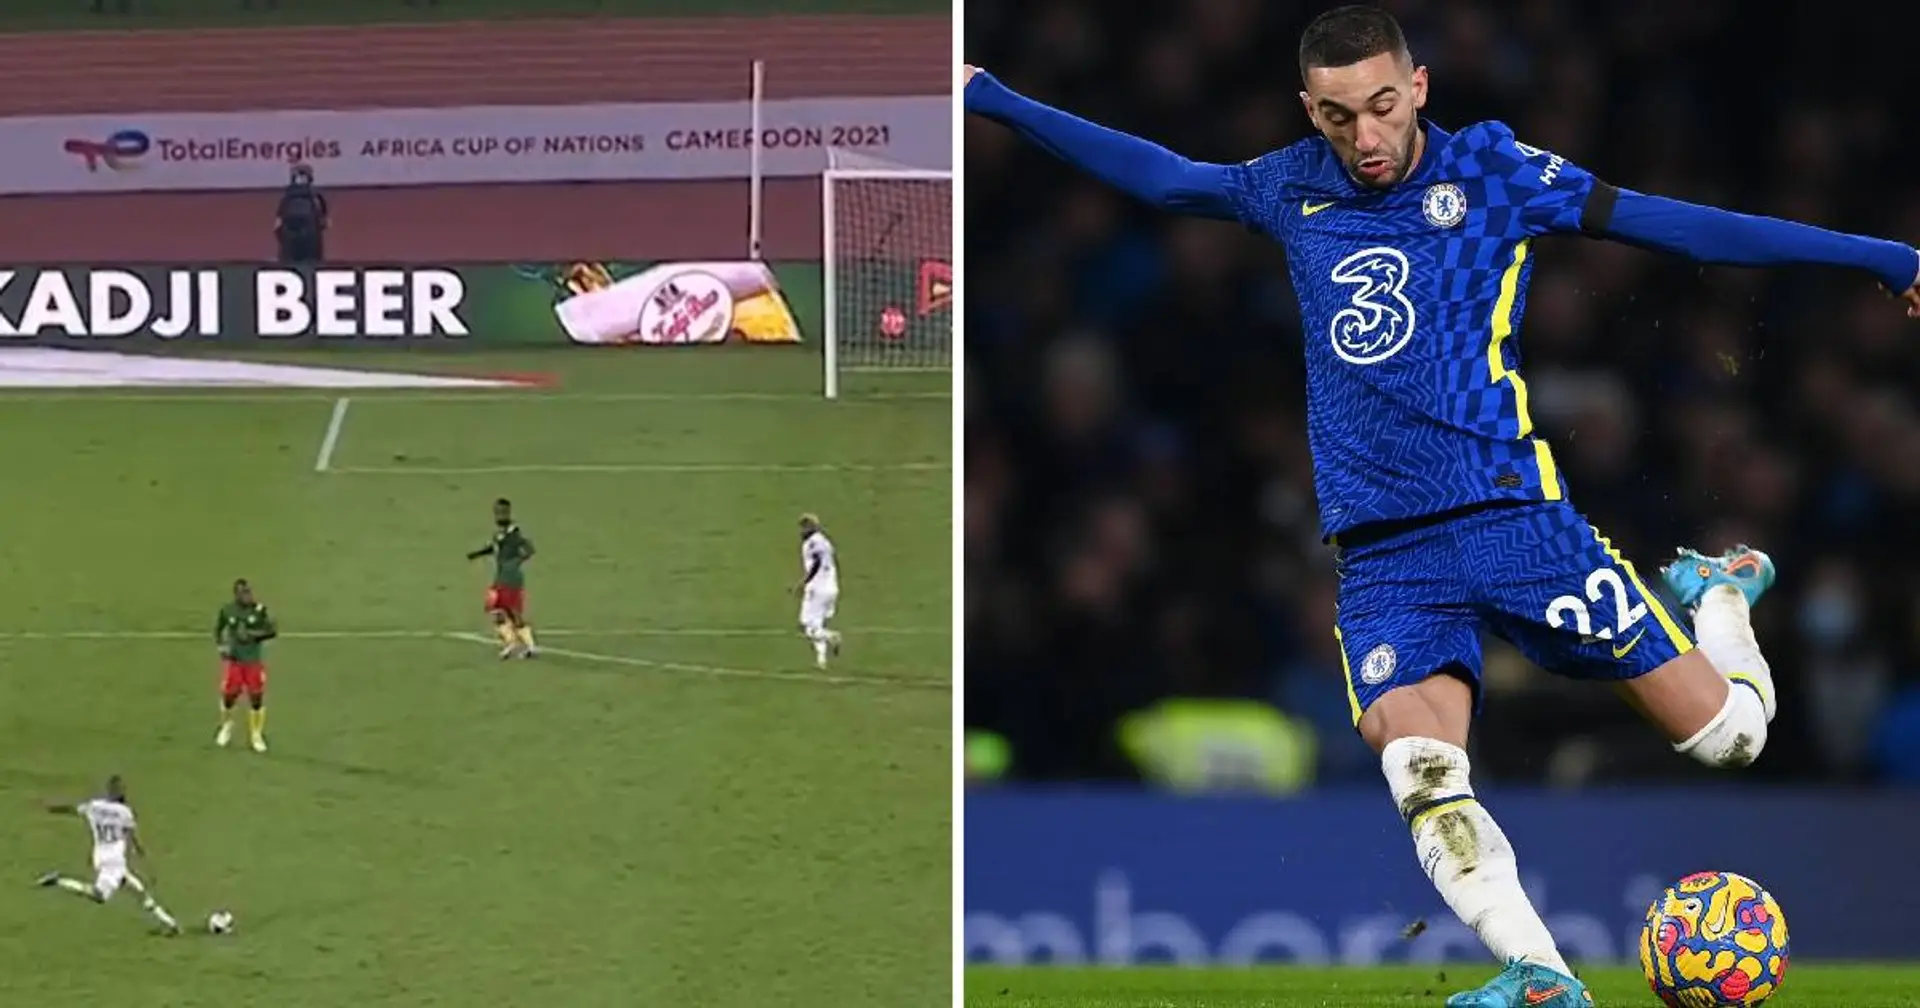 'He got inspired by Ziyech': Fans compare Comoros' wonder free-kick goal to Hakim's Spurs' strike (video)